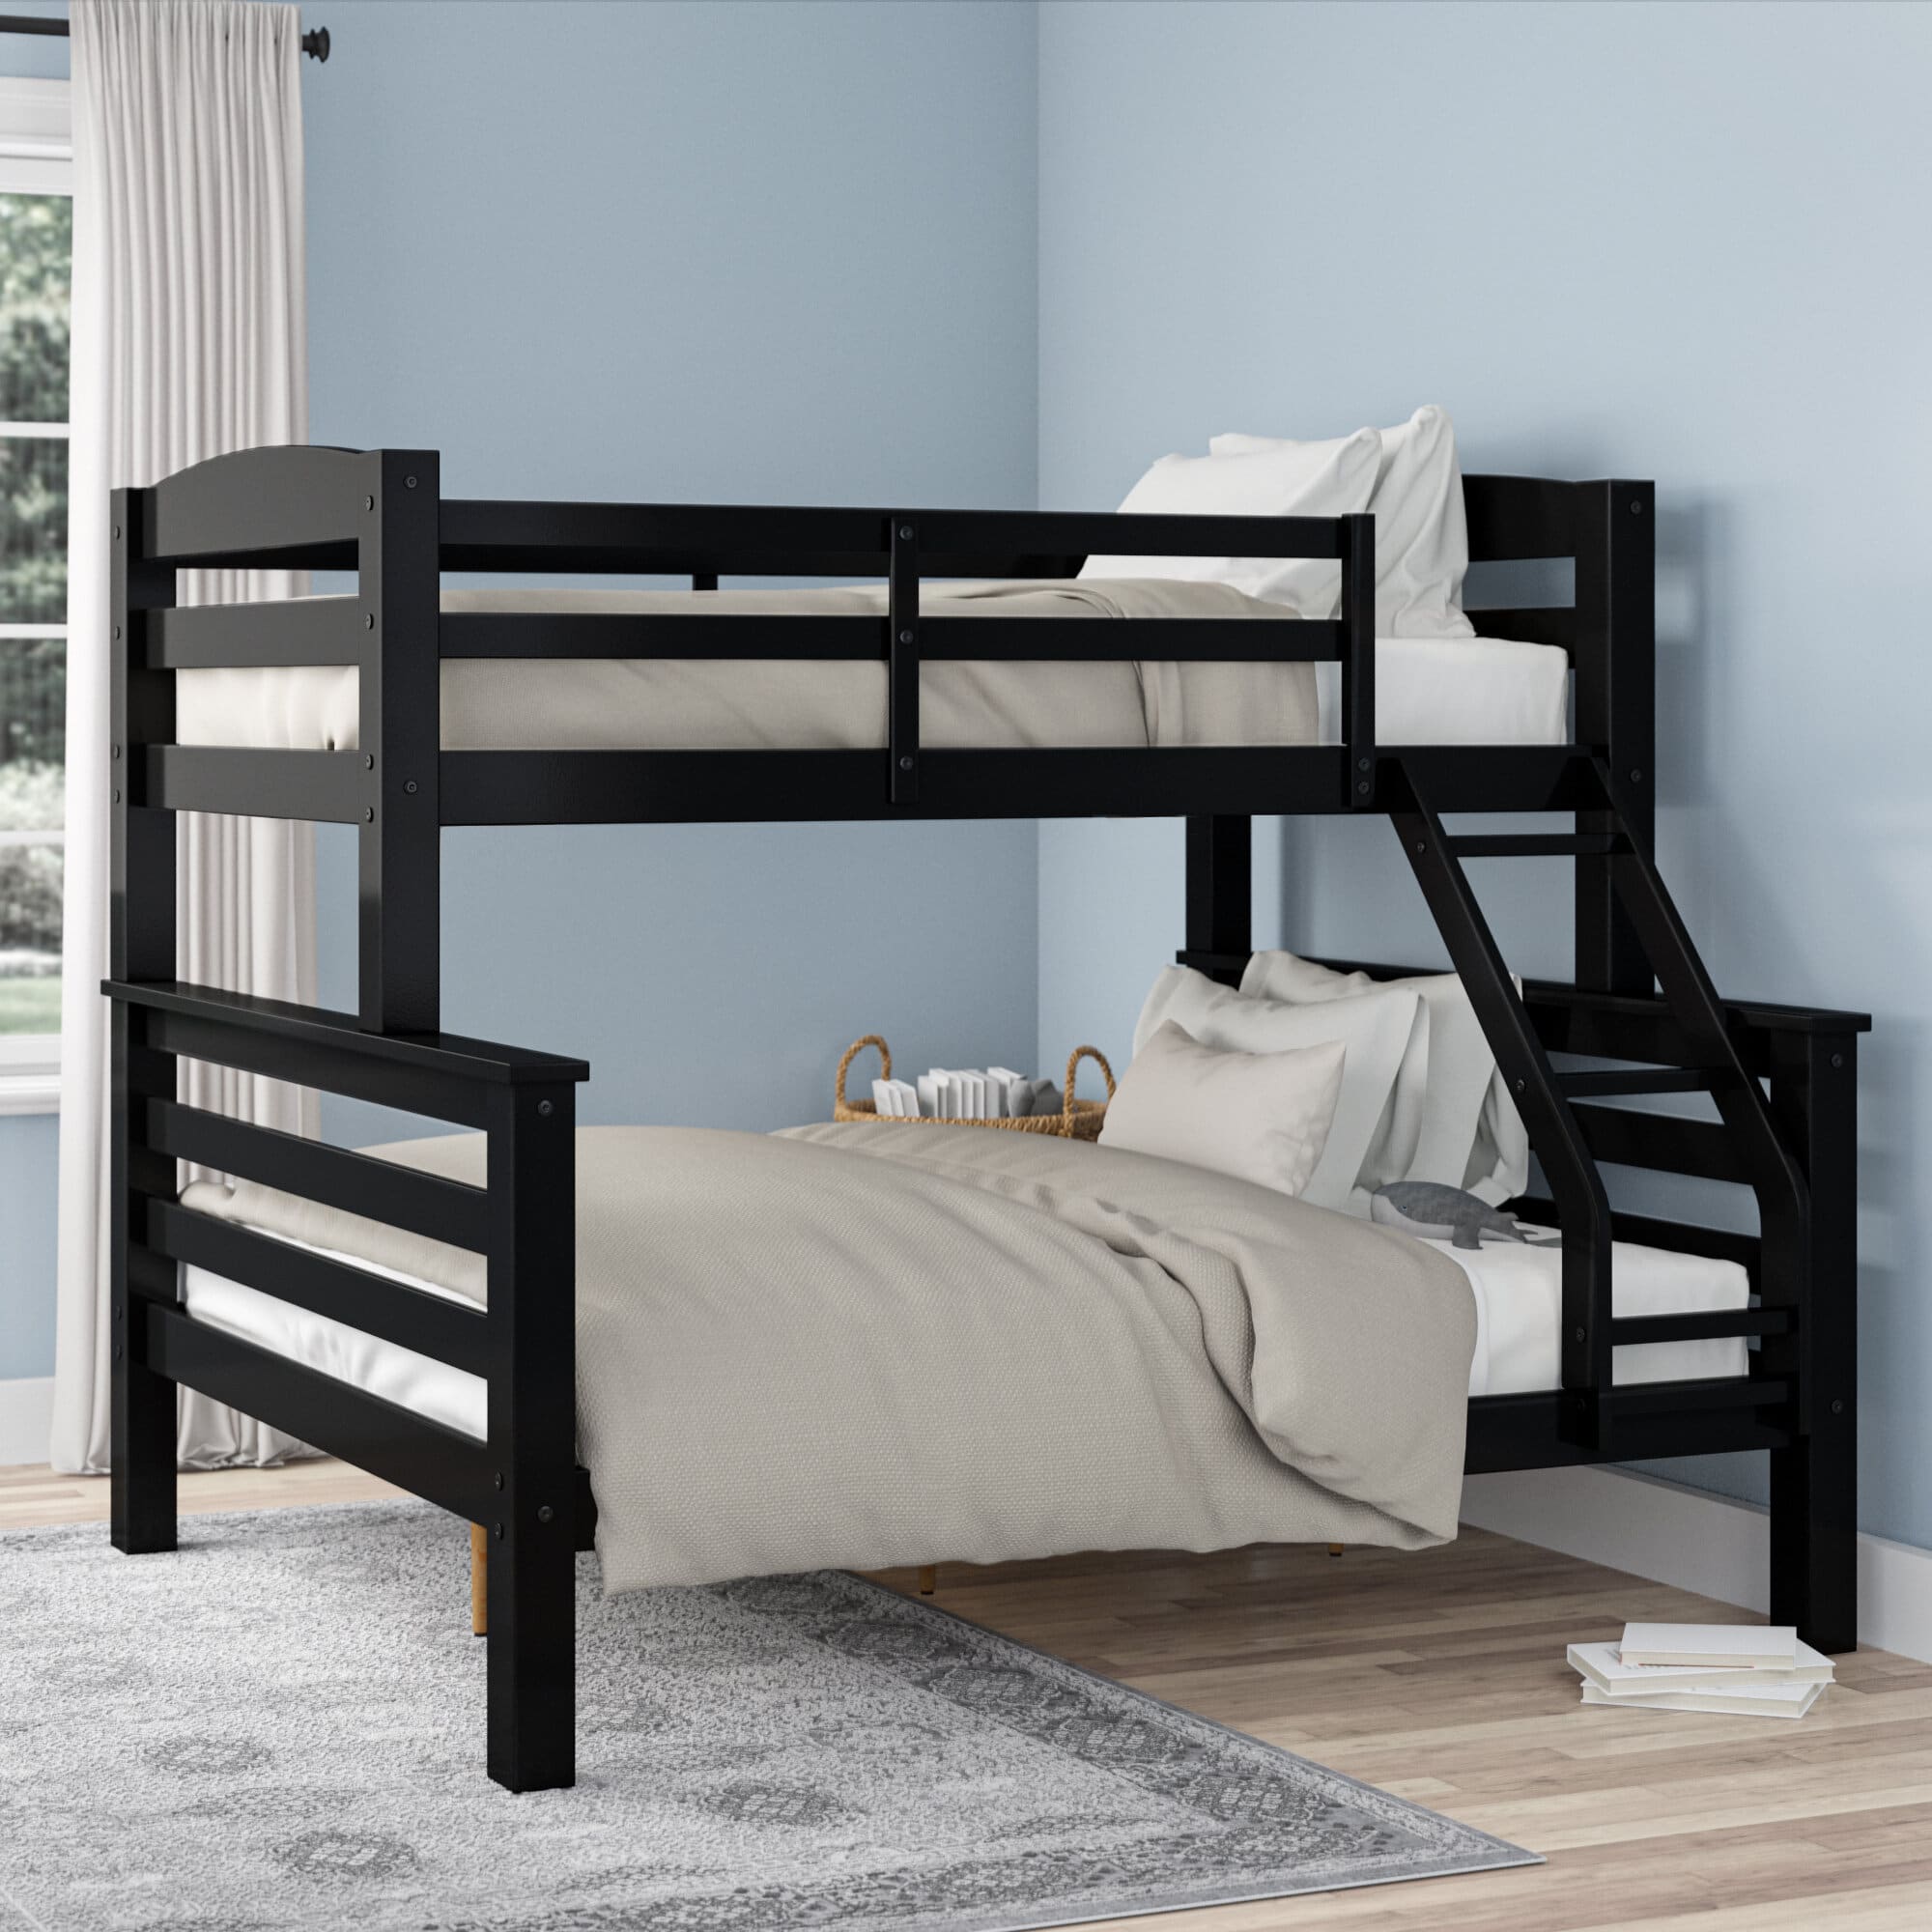 6 Best Twin Over Full Bunk Beds May, Full Bottom Twin Top Bunk Bed